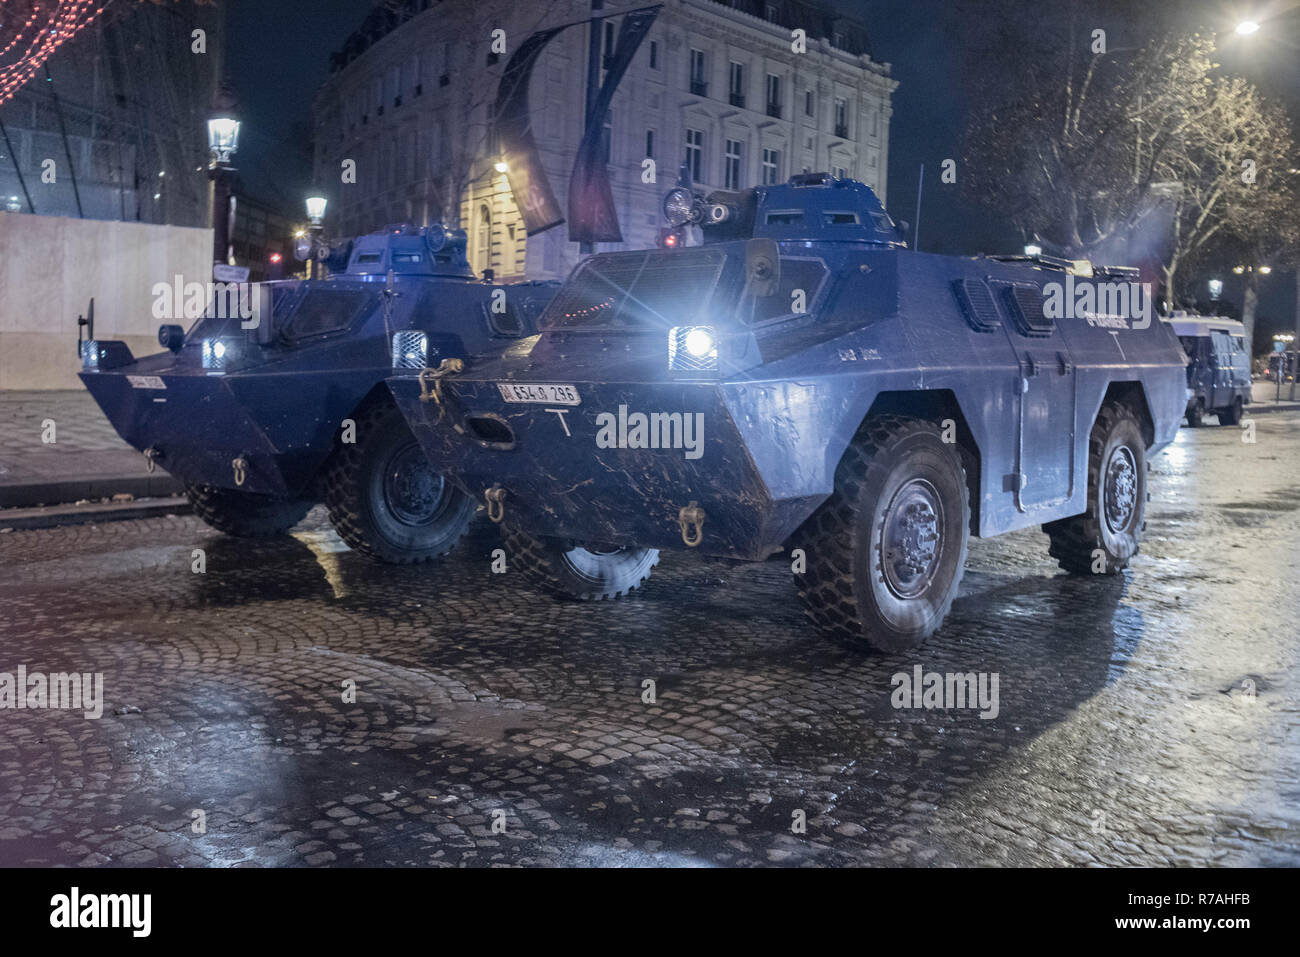 Yellow vests - Avenue des Champs-Elysees in Paris December 8, 2018 - The police use the armored gendarmerie. Stock Photo